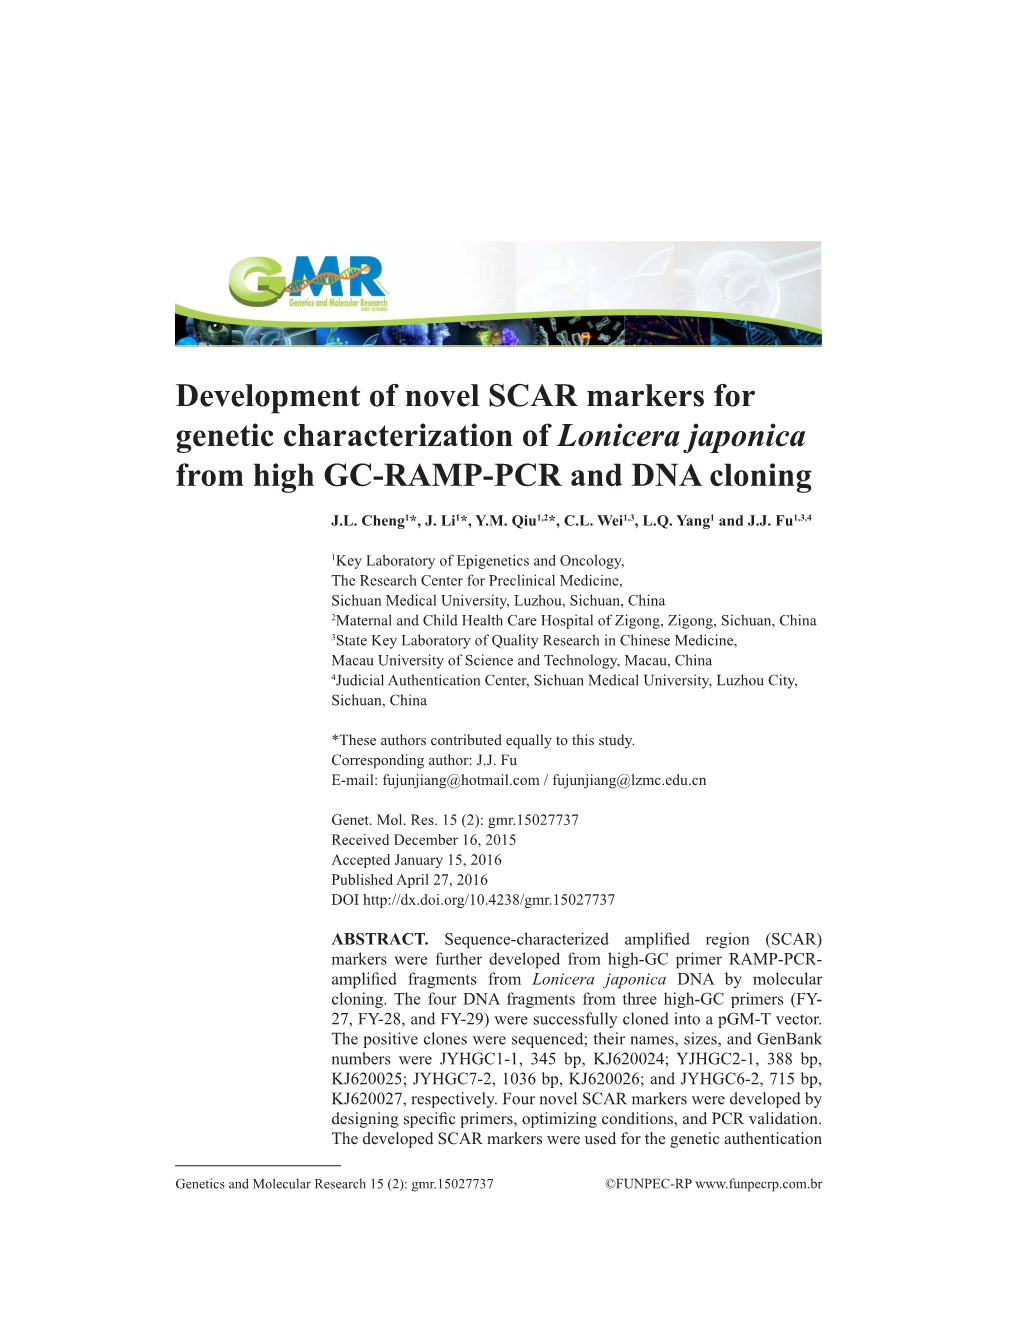 Development of Novel SCAR Markers for Genetic Characterization of Lonicera Japonica from High GC-RAMP-PCR and DNA Cloning